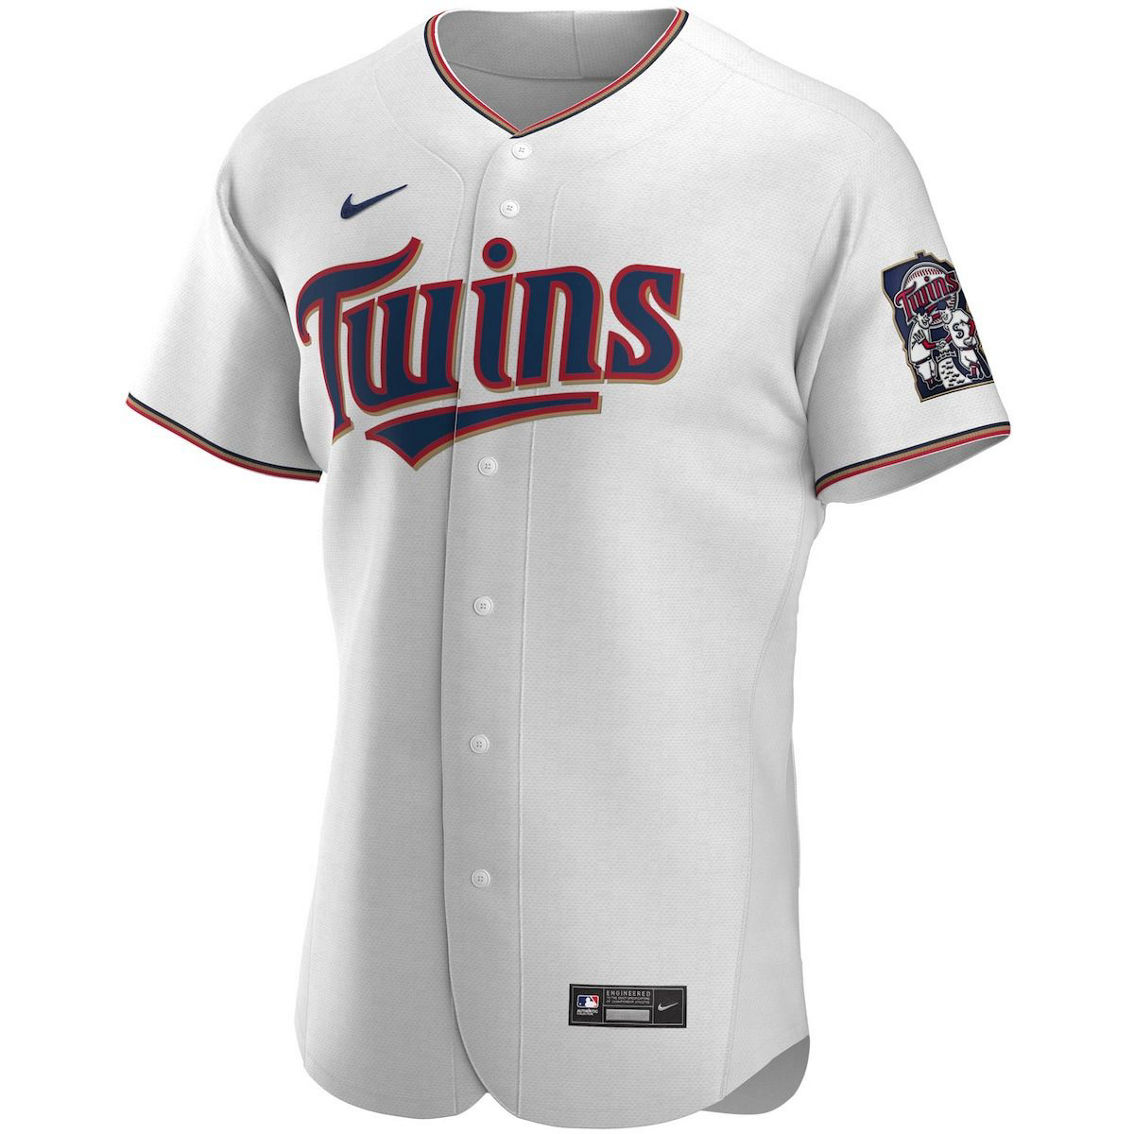 Nike Men's Miguel Sano White Minnesota Twins Home Authentic Player Jersey - Image 3 of 4